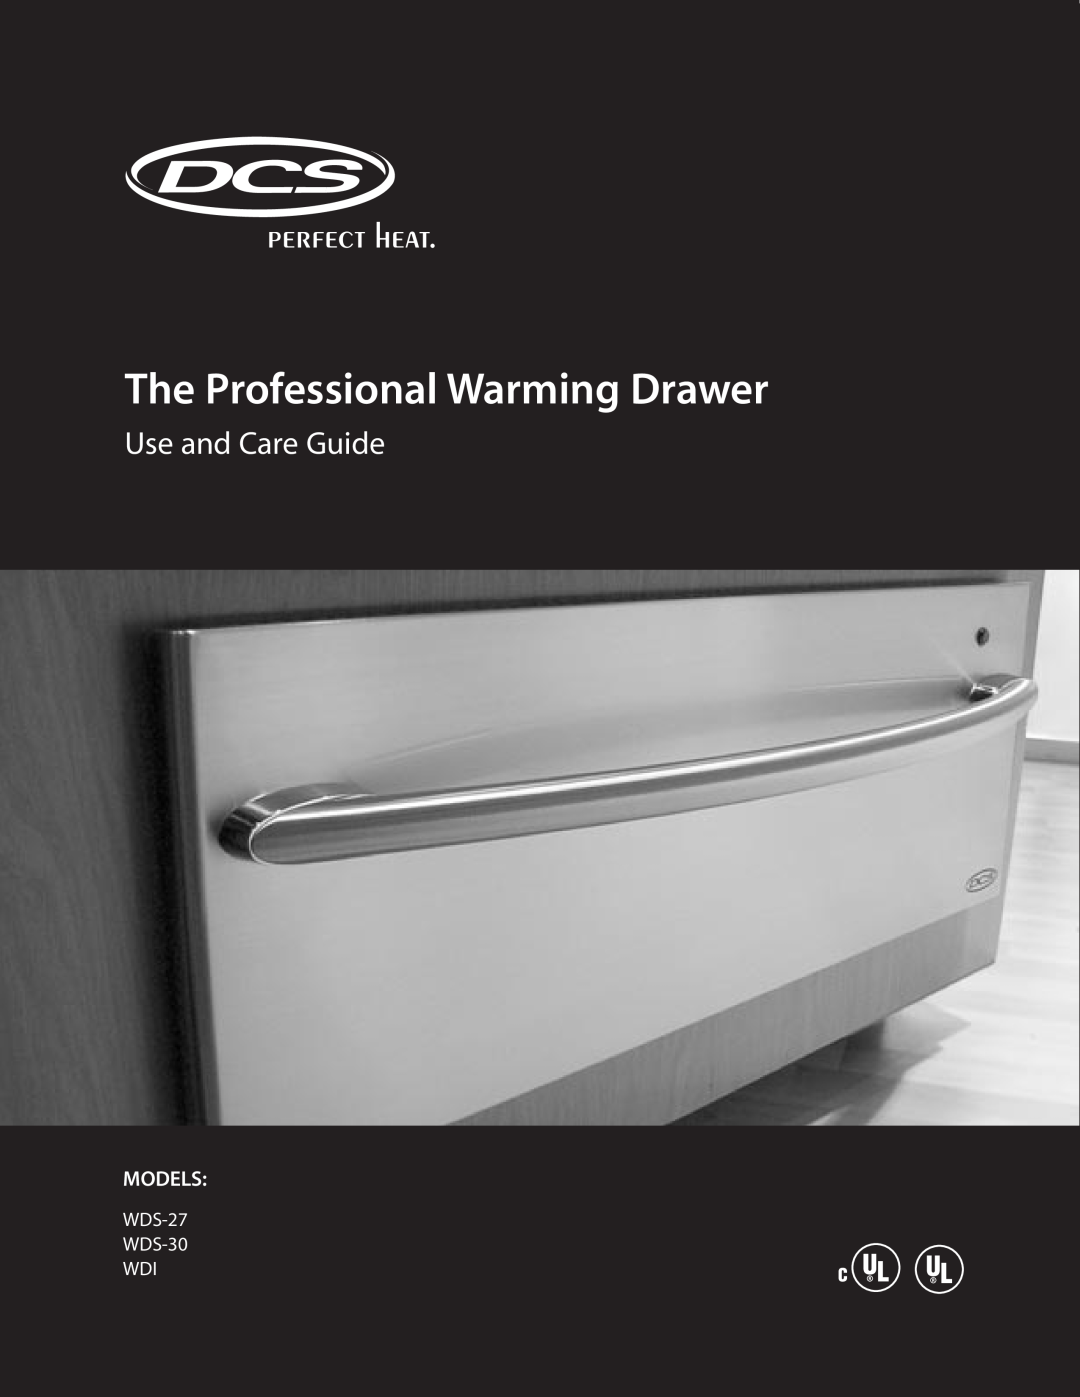 DCS manual The Professional Warming Drawer, Use and Care Guide, Models, WDS-27 WDS-30 WDI 